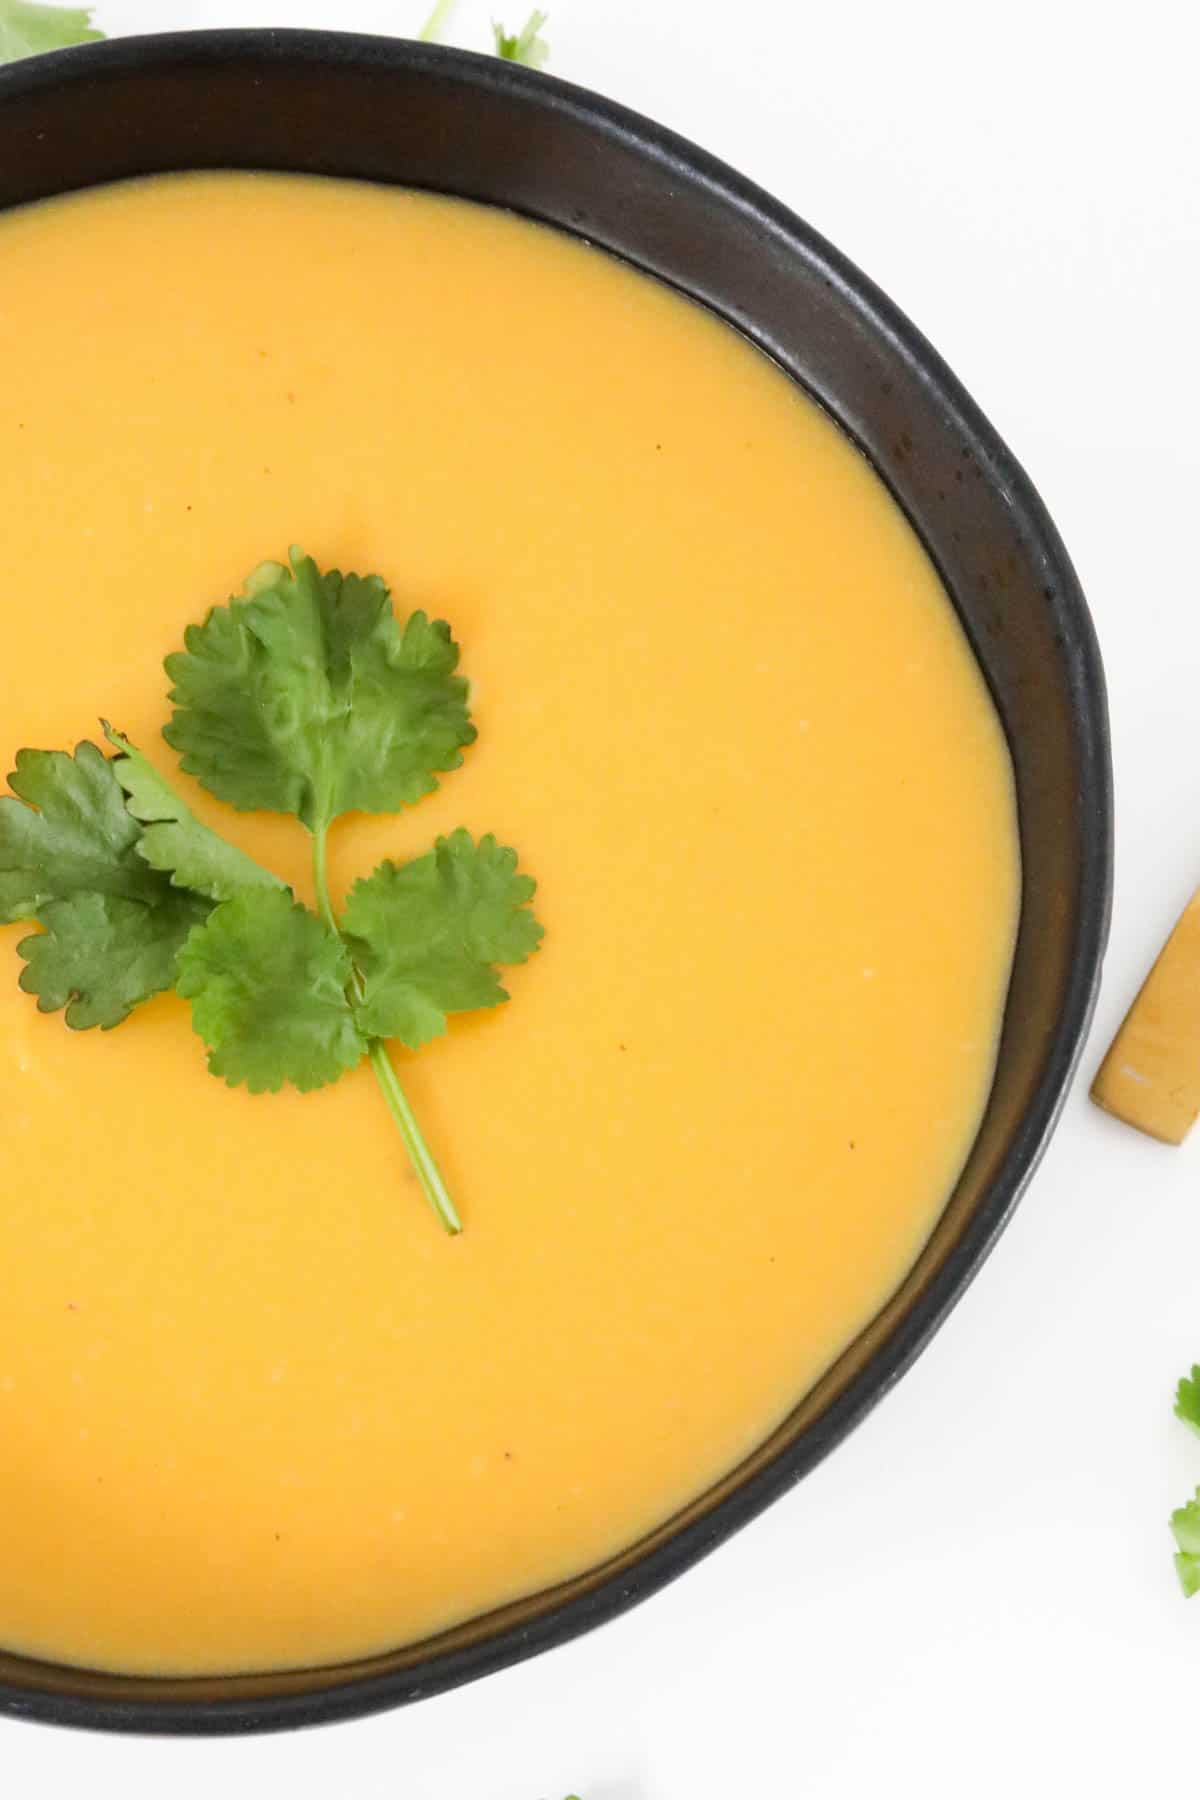 Bright yellow soup in a black bowl with a sprig of parsley on top